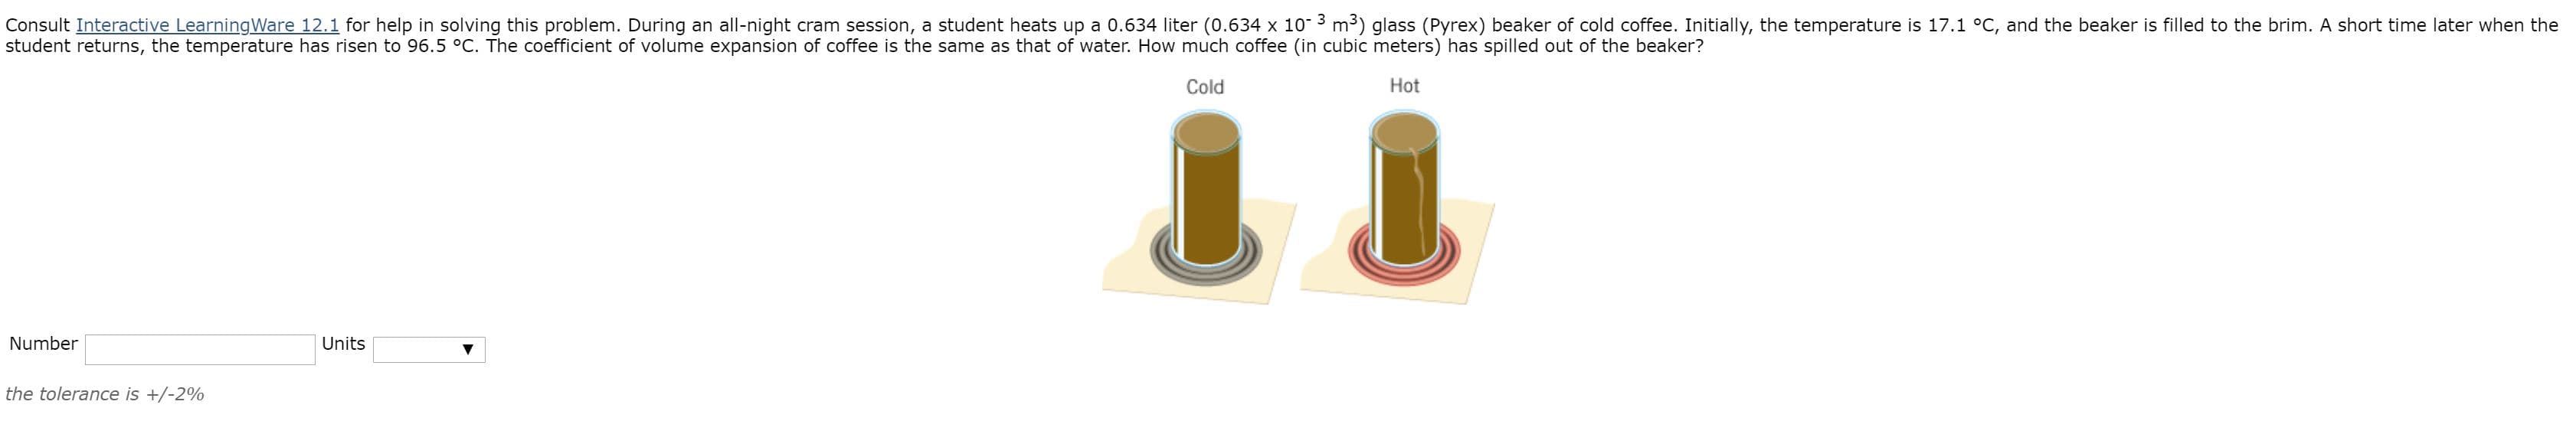 Consult Interactive LearningWare 12.1 for help in solving this problem. During an all-night cram session, a student heats up a 0.634 liter (0.634 x 10 3 m3) glass (Pyrex) beaker of cold coffee. Initially, the temperature is 17.1 °C, and the beaker is filled to the brim. A short time later when the
student returns, the temperature has risen to 96.5 °C. The coefficient of volume expansion of coffee is the same as that of water. How much coffee (in cubic meters) has spilled out of the beaker?
